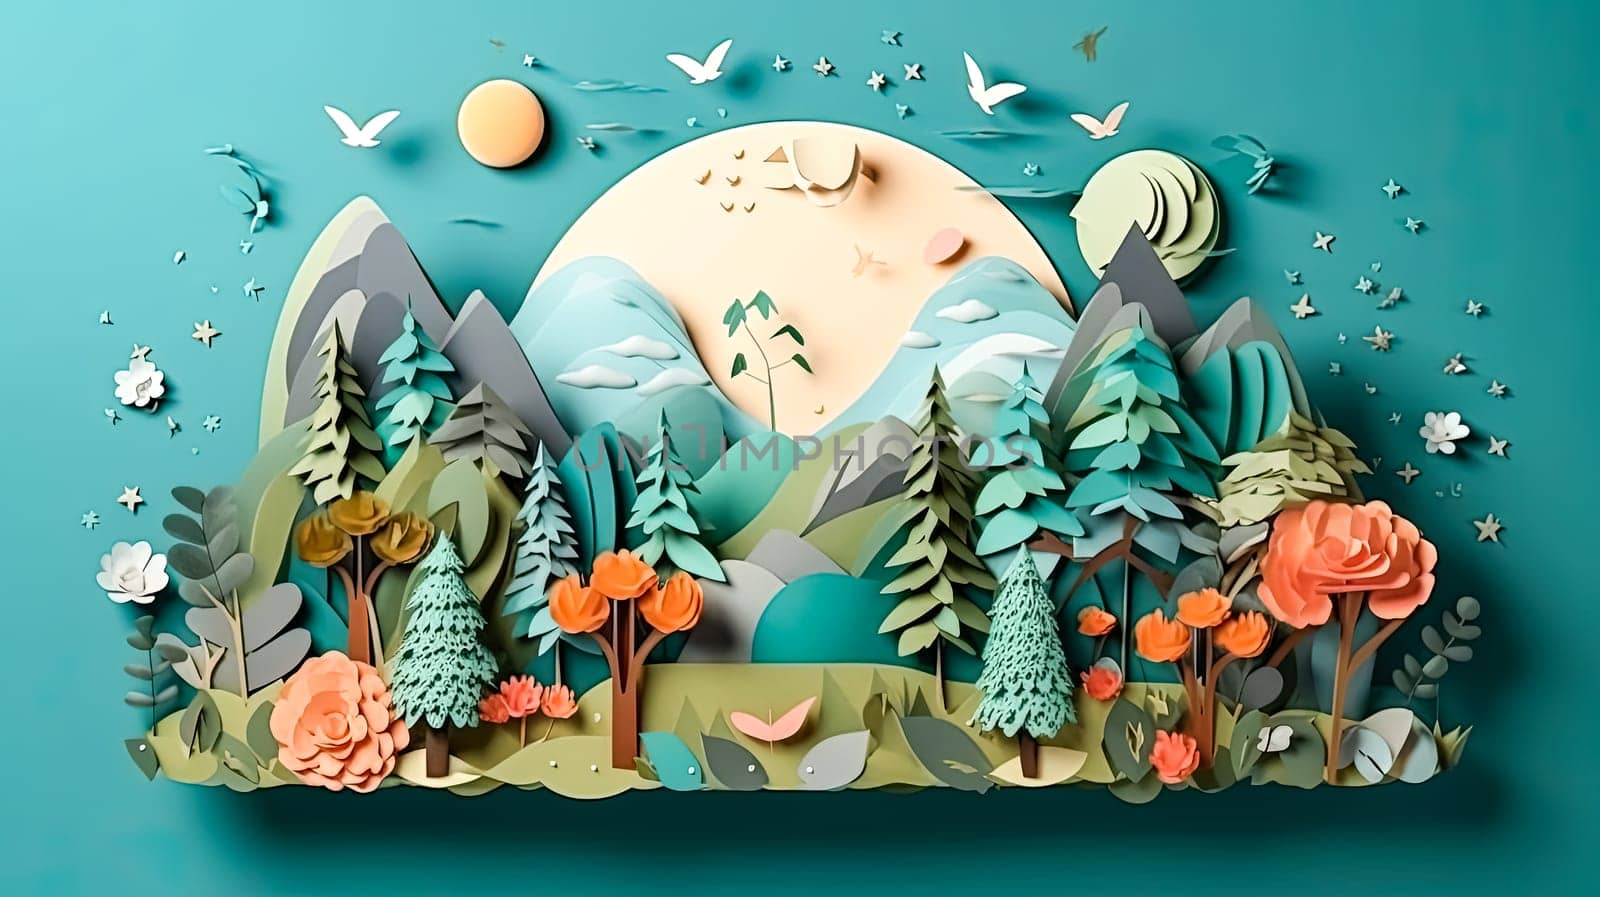 Earth adorned with trees and grass, a vibrant illustration of nature by Alla_Morozova93